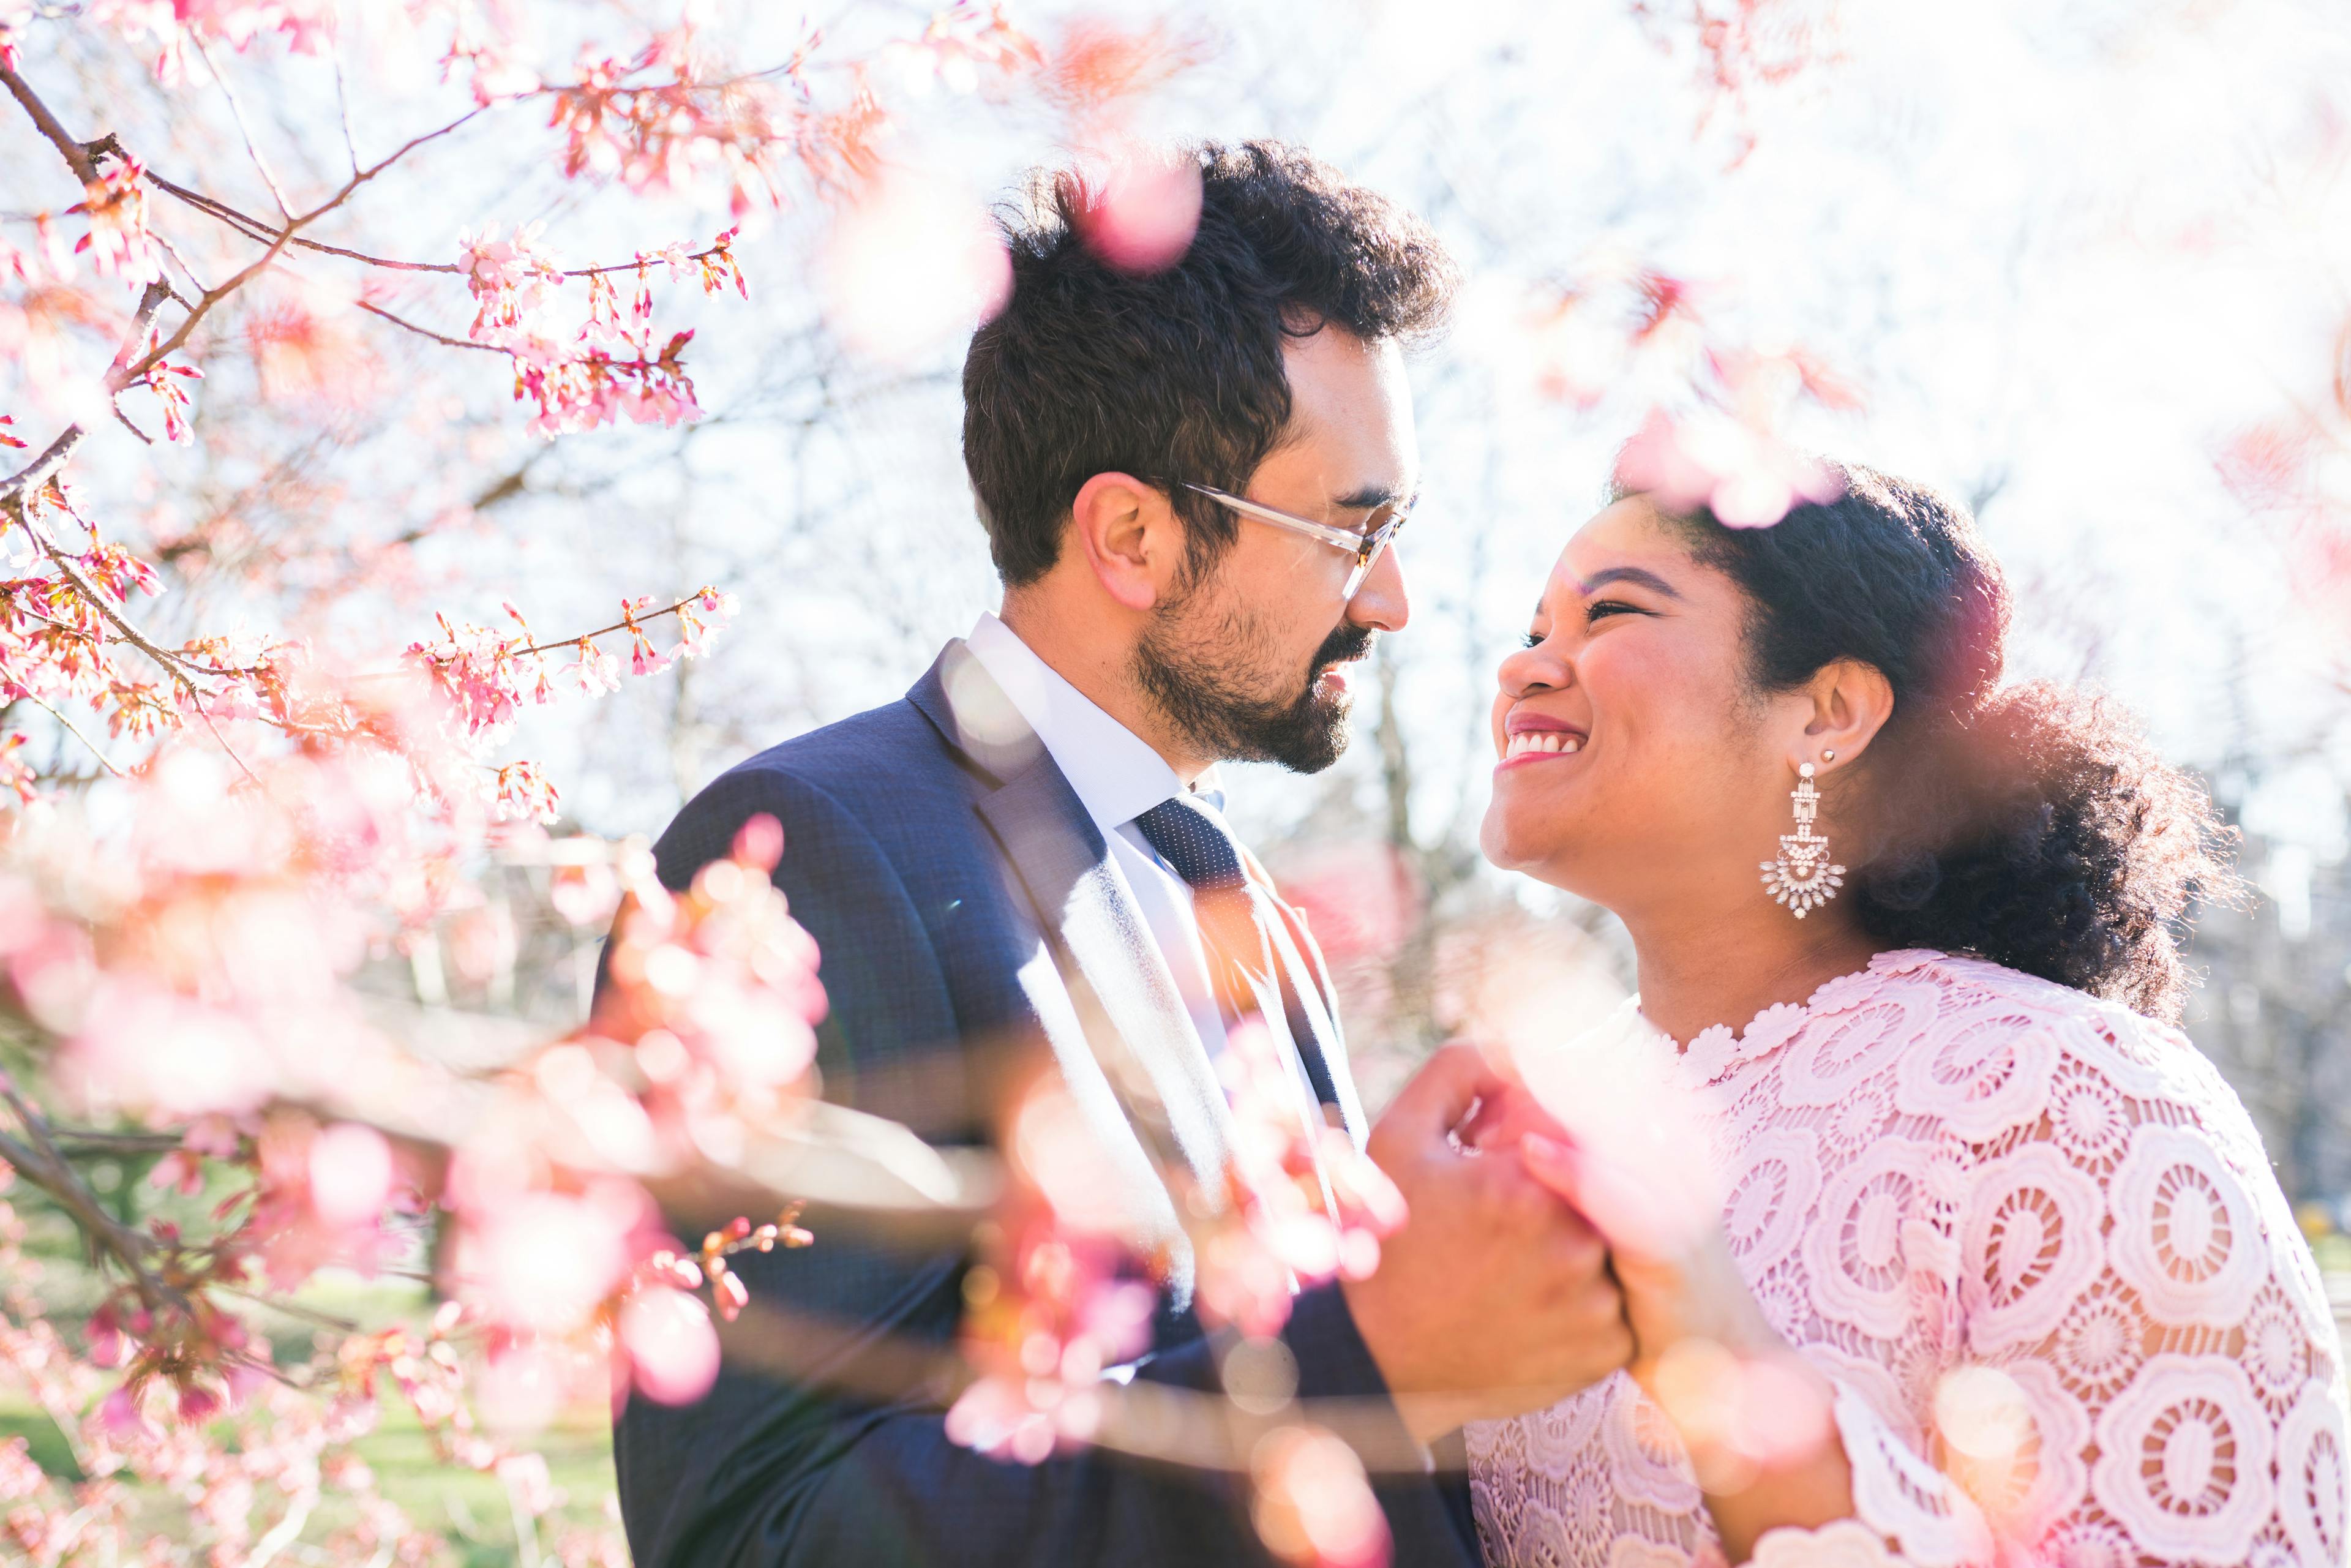 A smiling couple facing each other surrounded by pink blossoms.